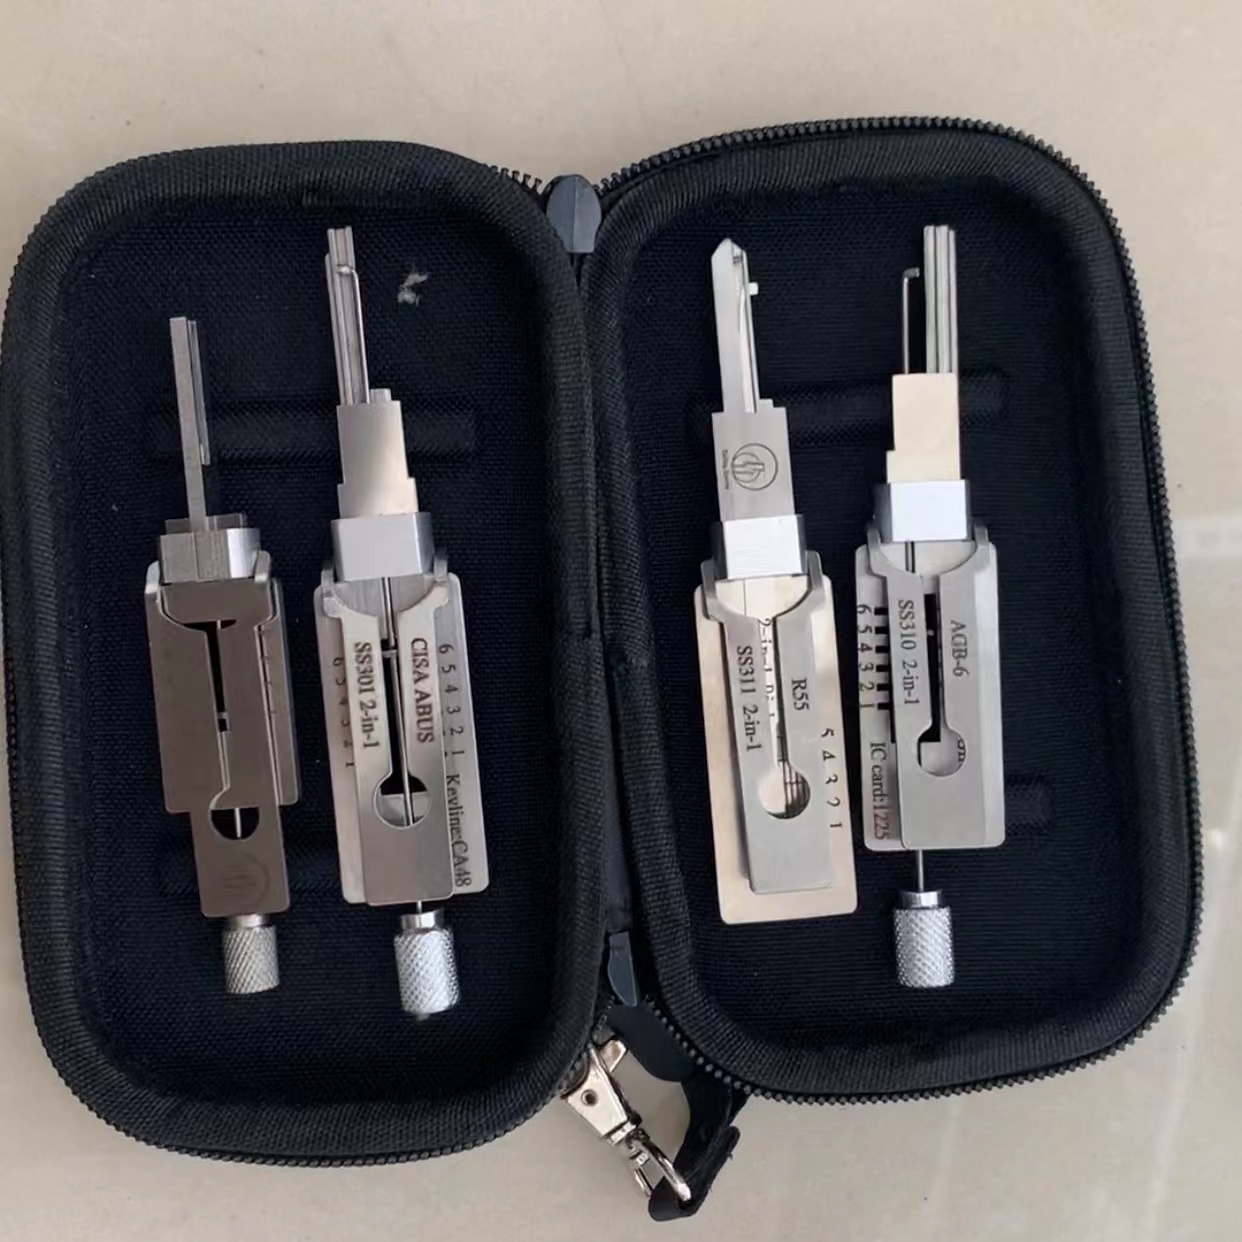 Lishi AGB-6 SS310 R55 SS311 CISA ABUS SS301 Samsung Smart SS300 2 in 1 Locksmith Tool 4 PCS Set with Magnetic Kit Bag